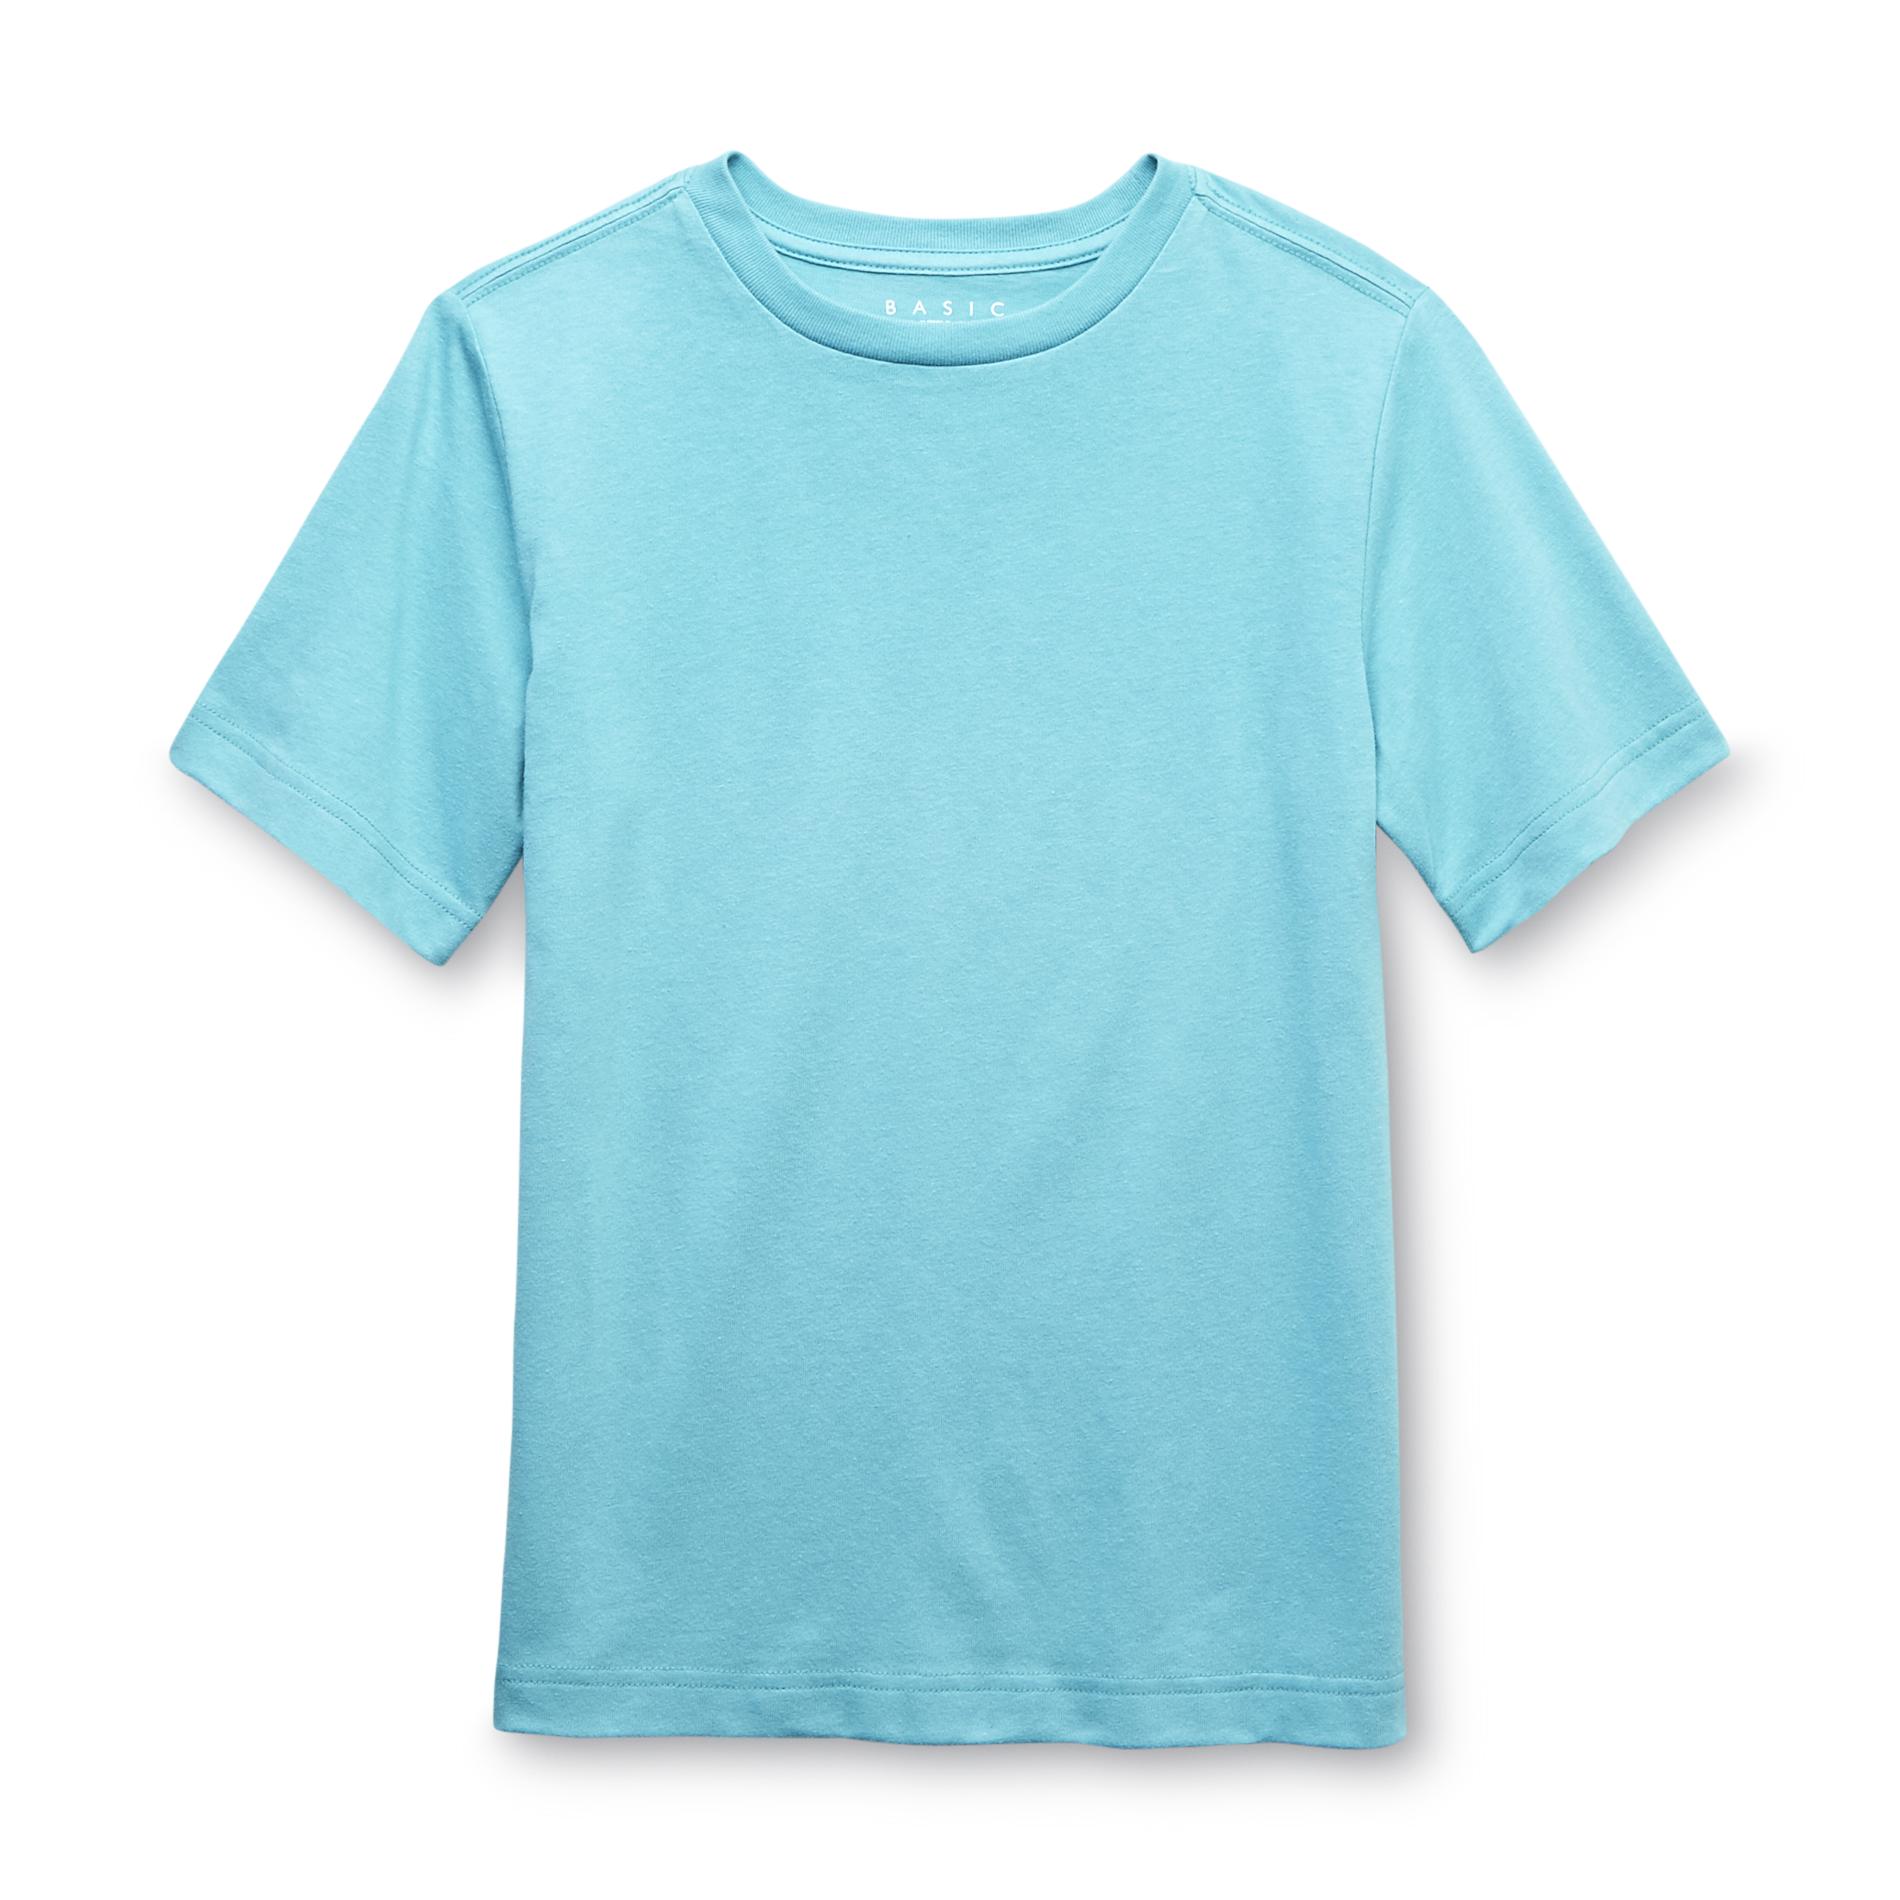 Basic Editions Boy's Crew Neck T-Shirt - Solid